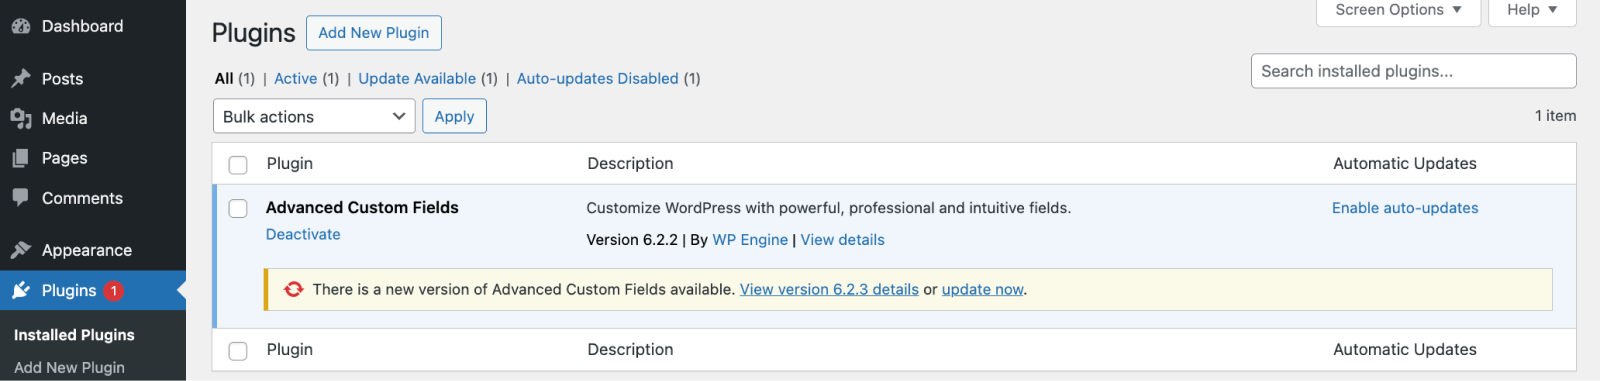 The Plugins admin screen in WordPress, showing a new version of ACF is available and the "update now" button. 